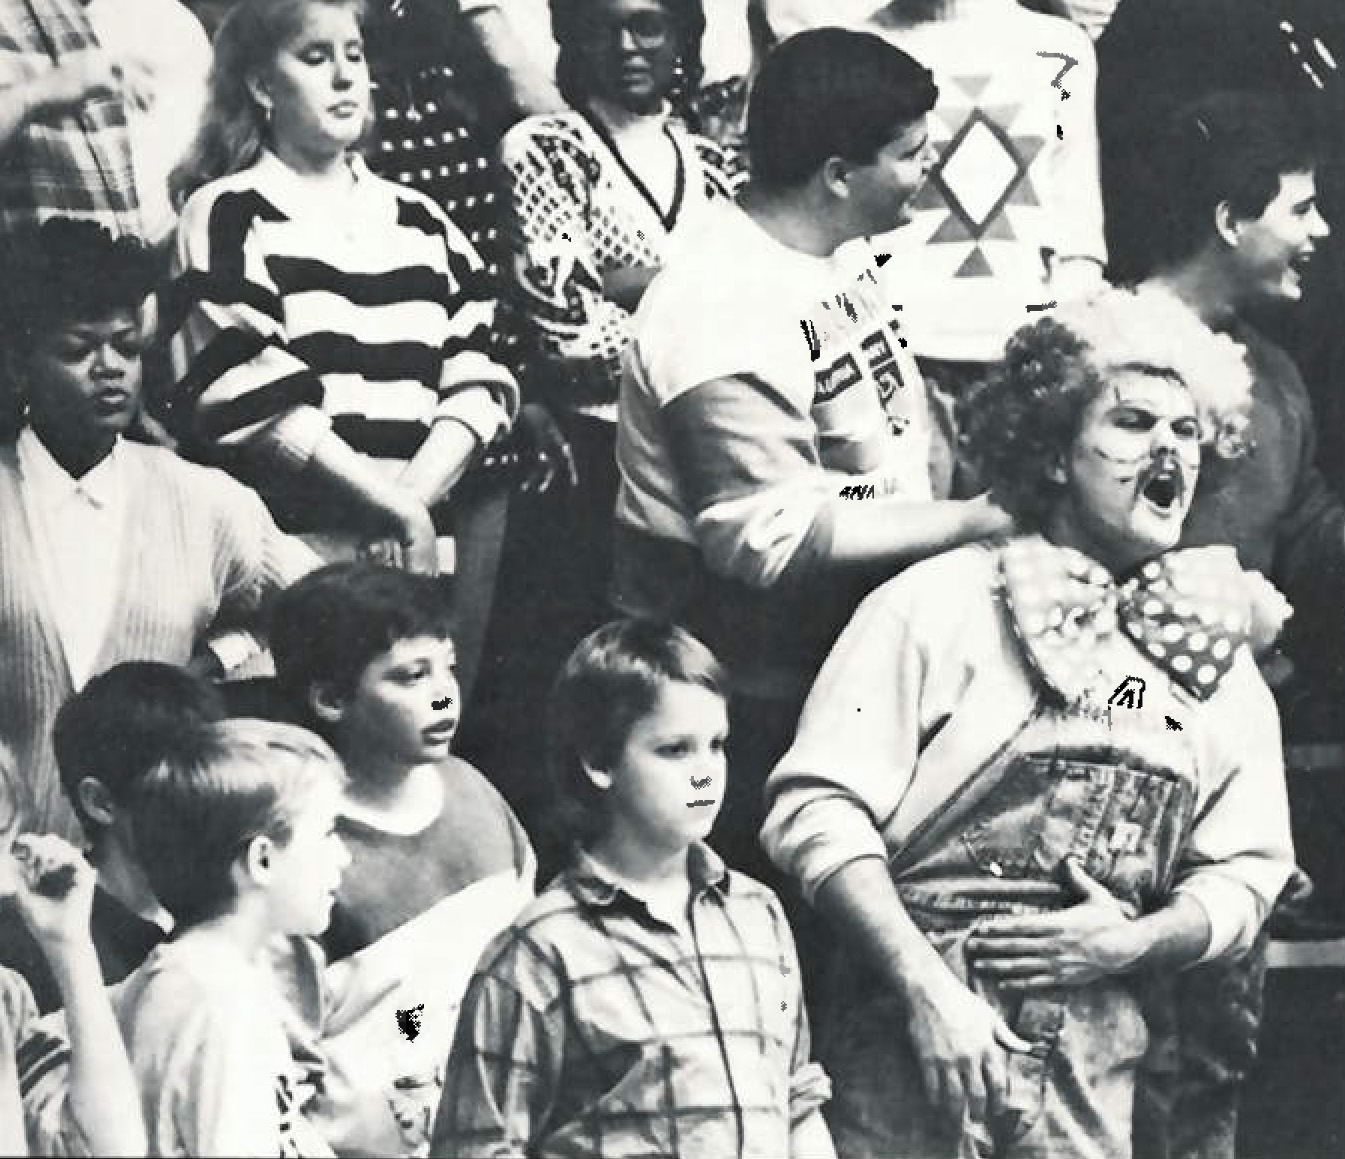 Fans cheer at a 1988 game in Racer Arena.